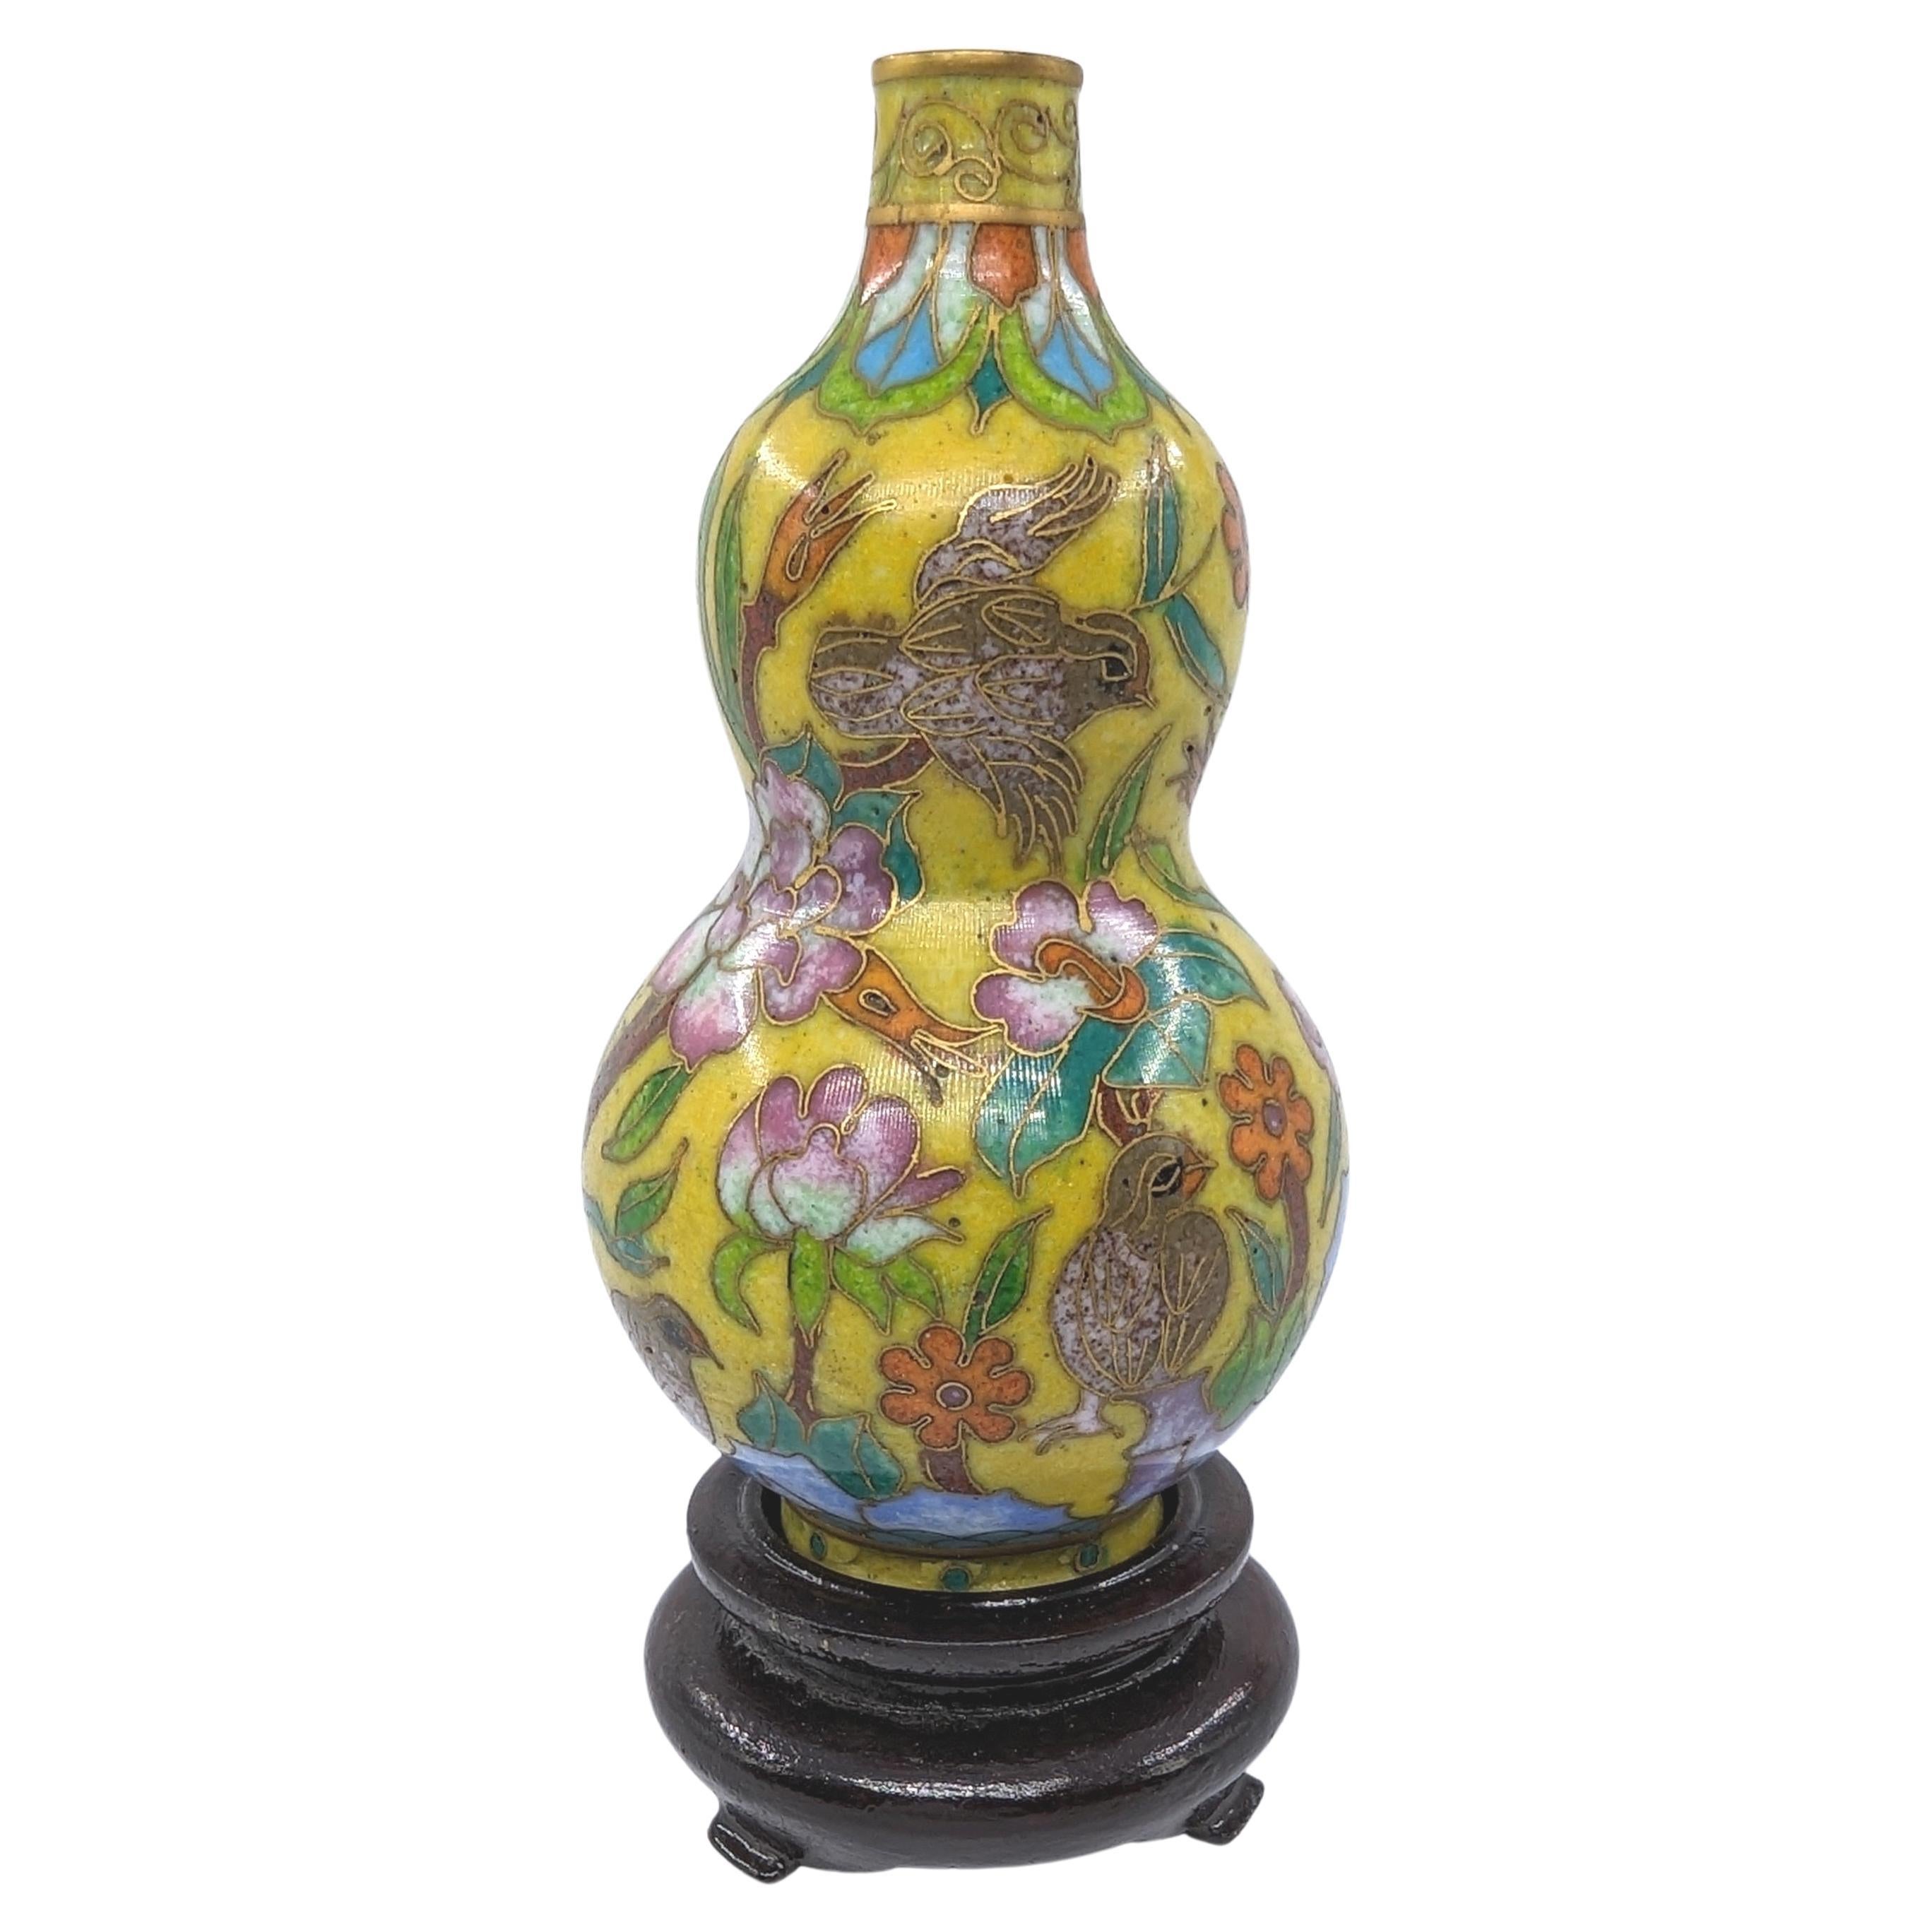 Fine antique Chinese cloisonne snuff bottle or miniature vase in hulu double gourd bottle form, on a carved hardwood stand

Early 20c Republic Period